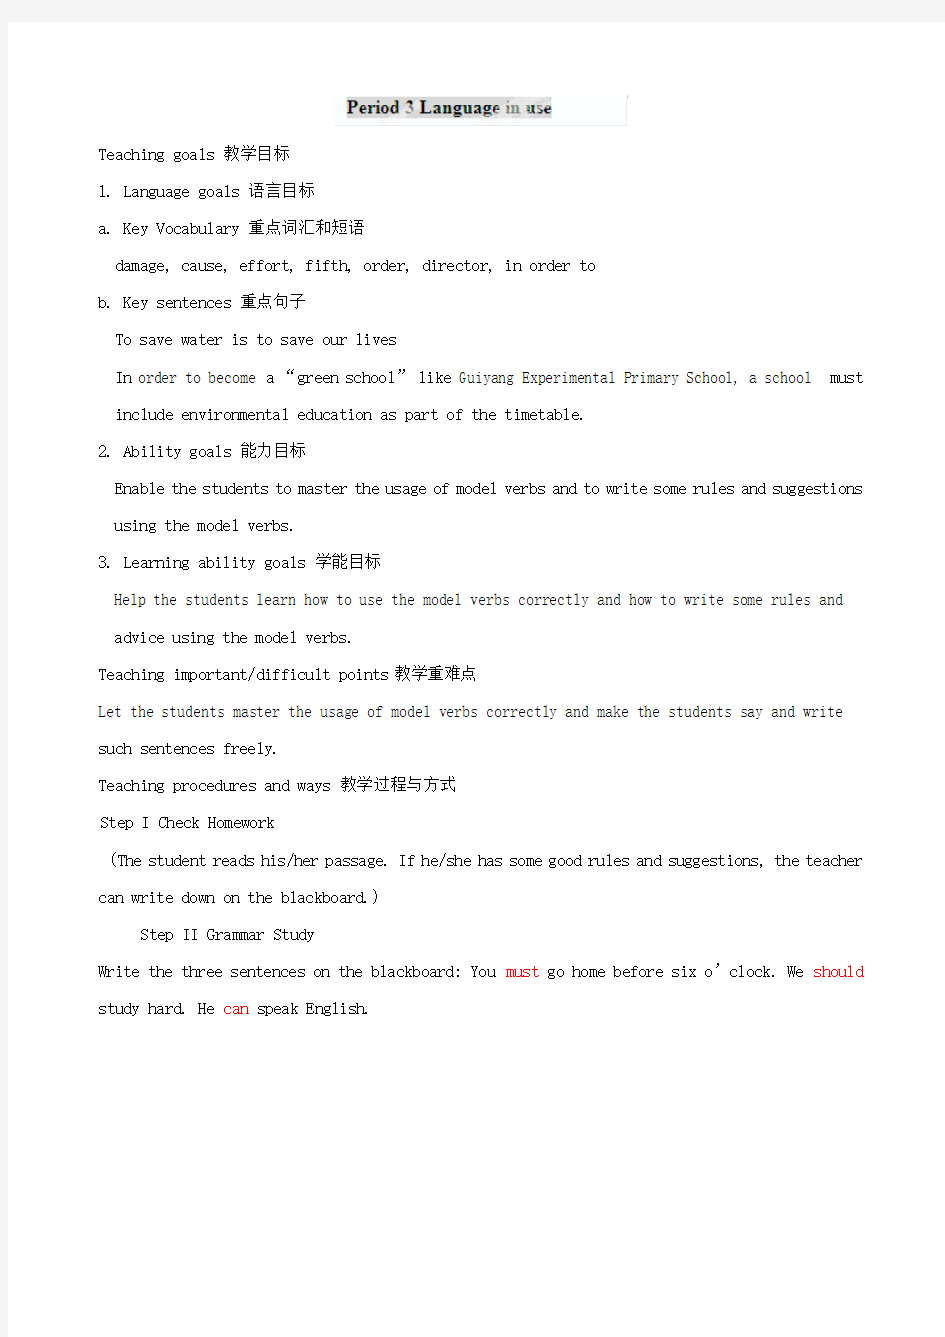 module5 rules and suggestions unit3 language in use教案-优质公开课-外研9下精品